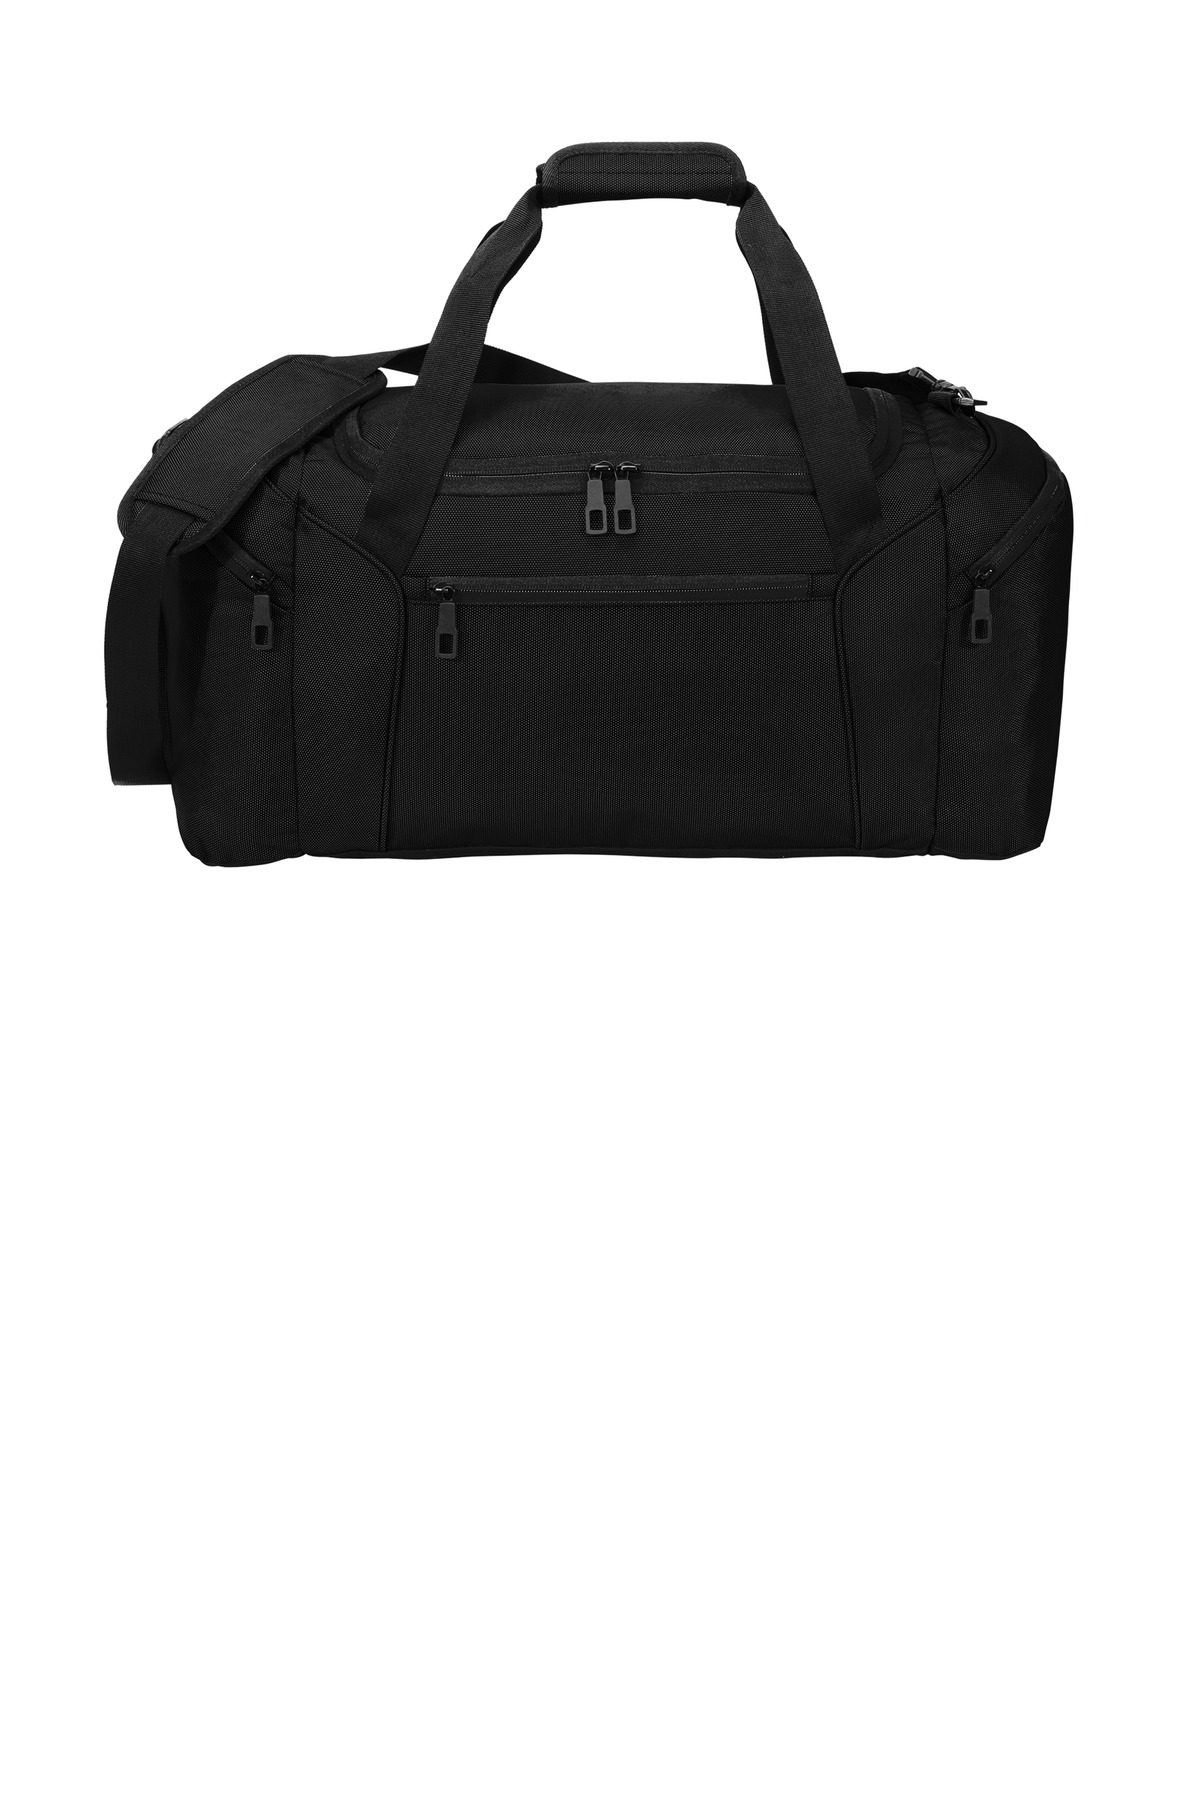 Port Authority Hospitality Bags ® Form Duffel-Port Authority